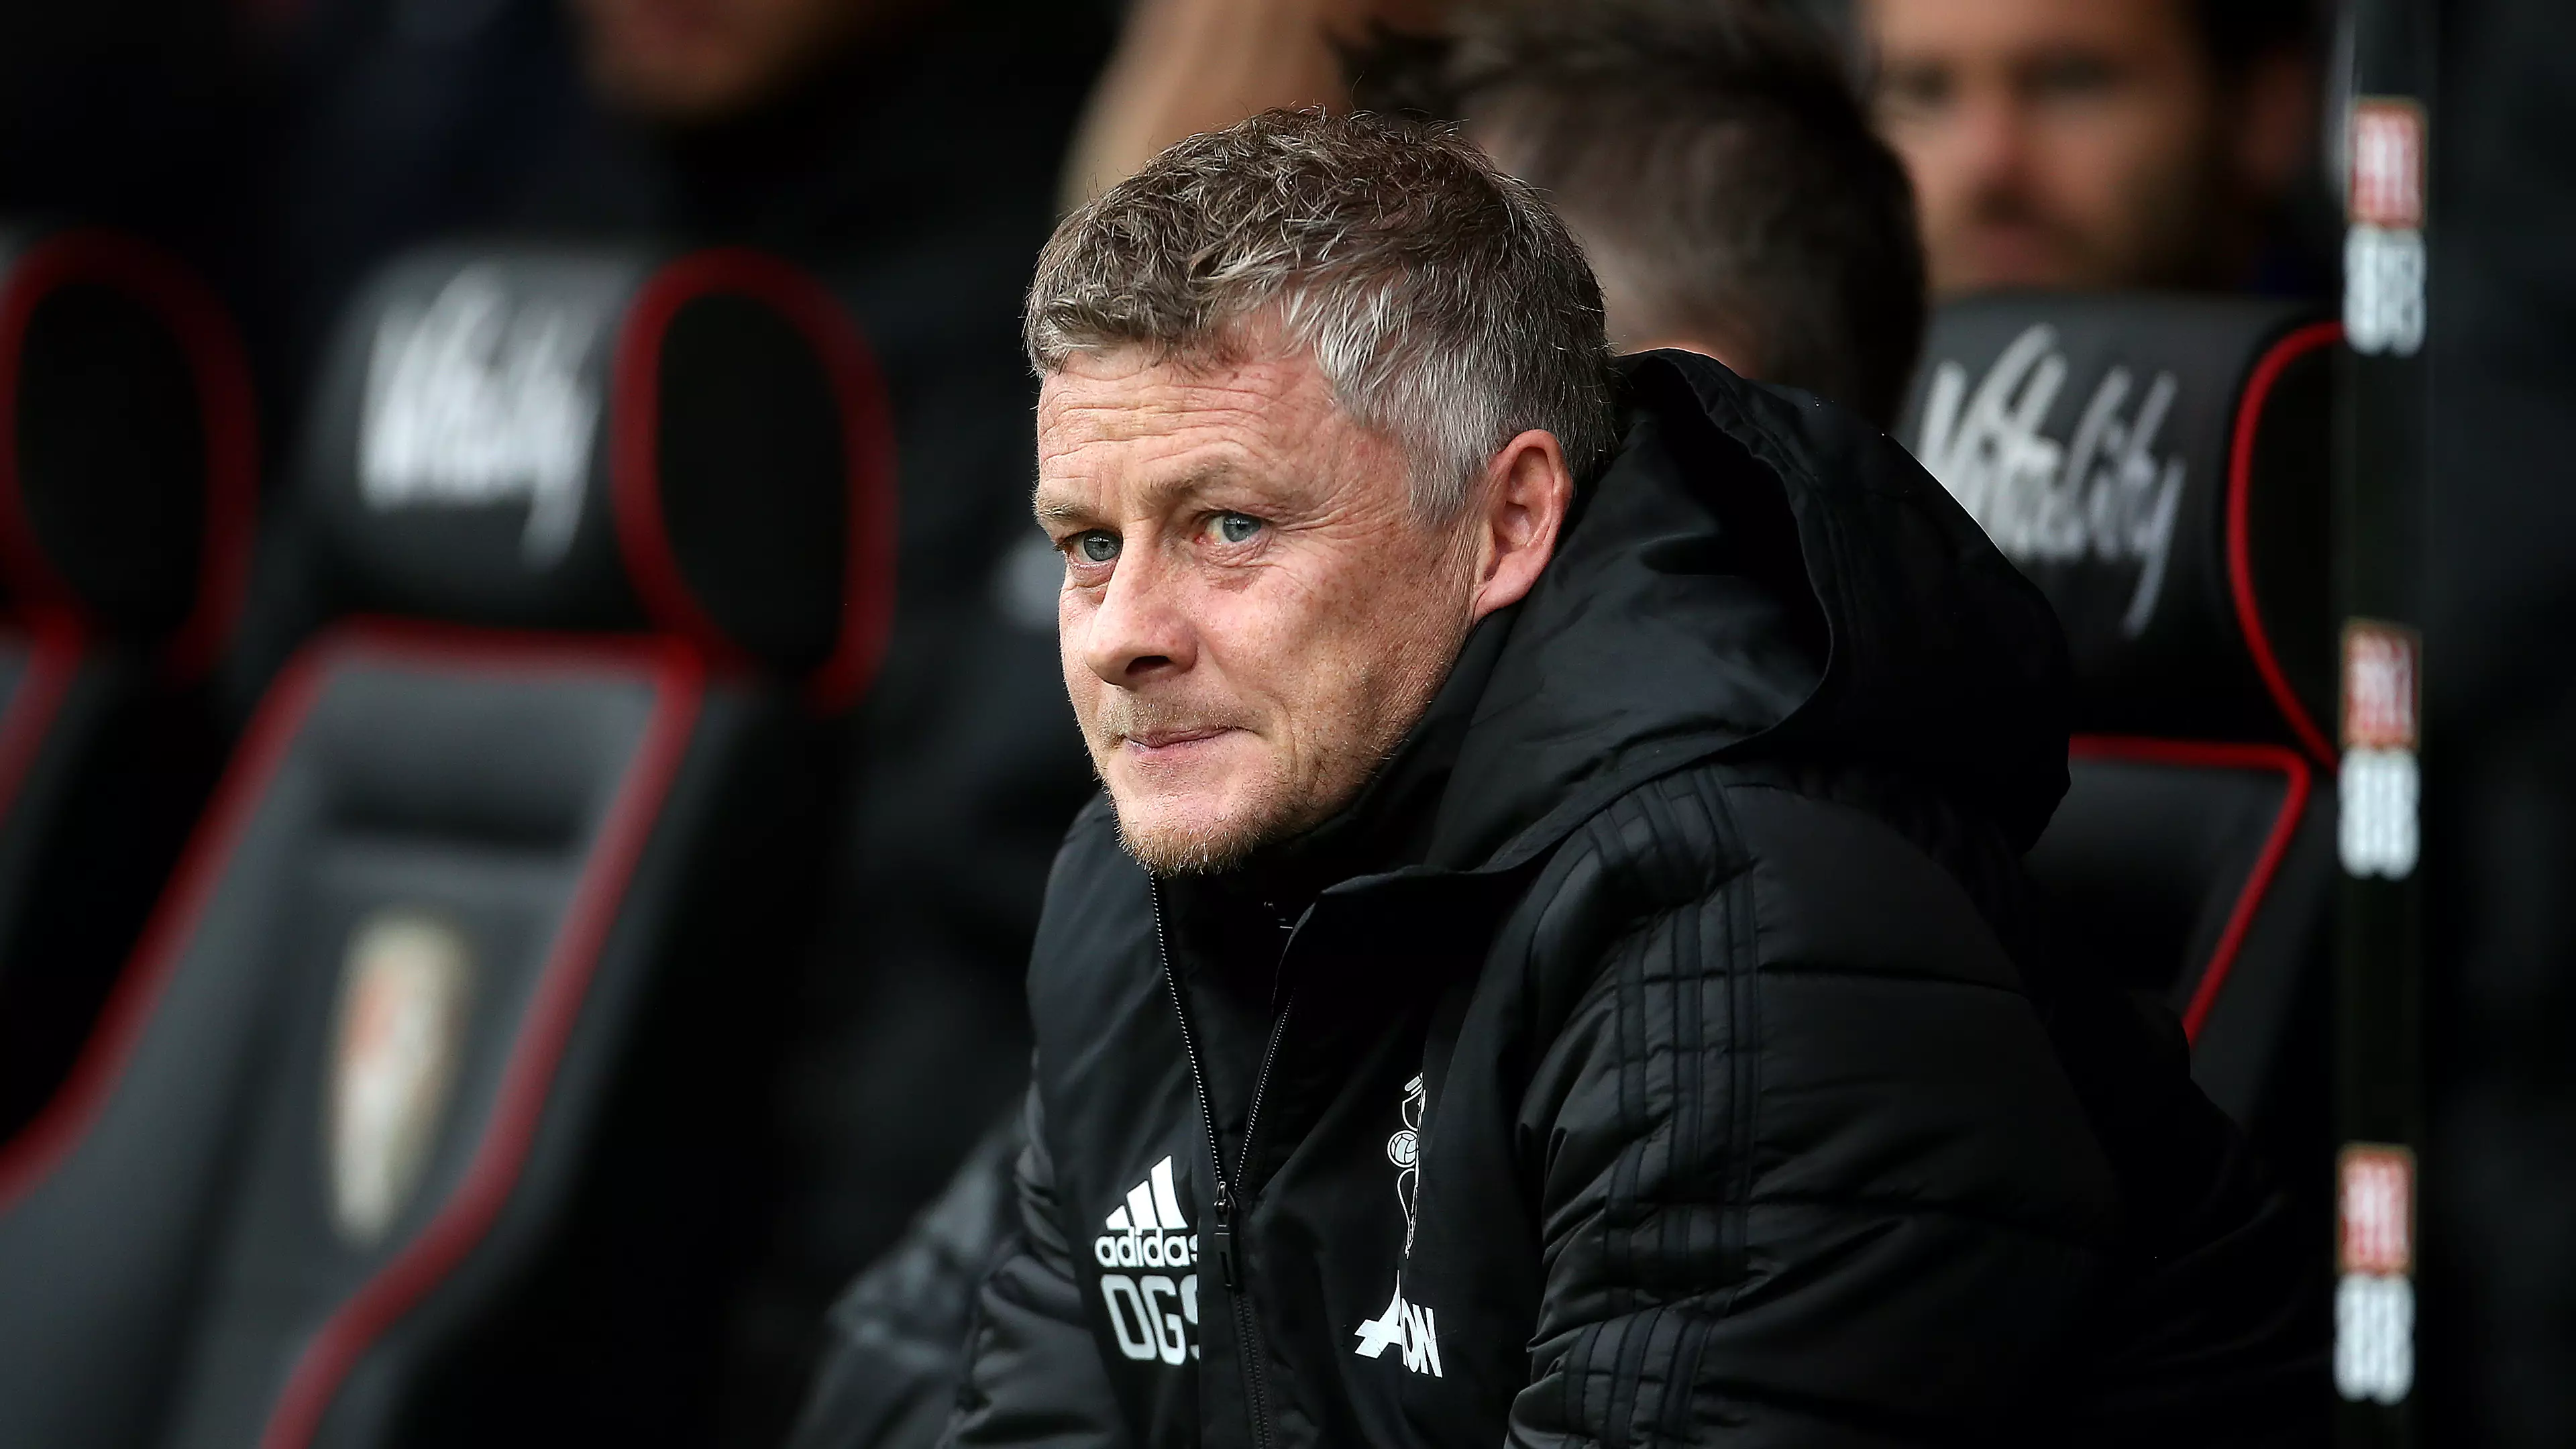 #OleOut Is Trending On Twitter As Manchester United Lose To Bournemouth